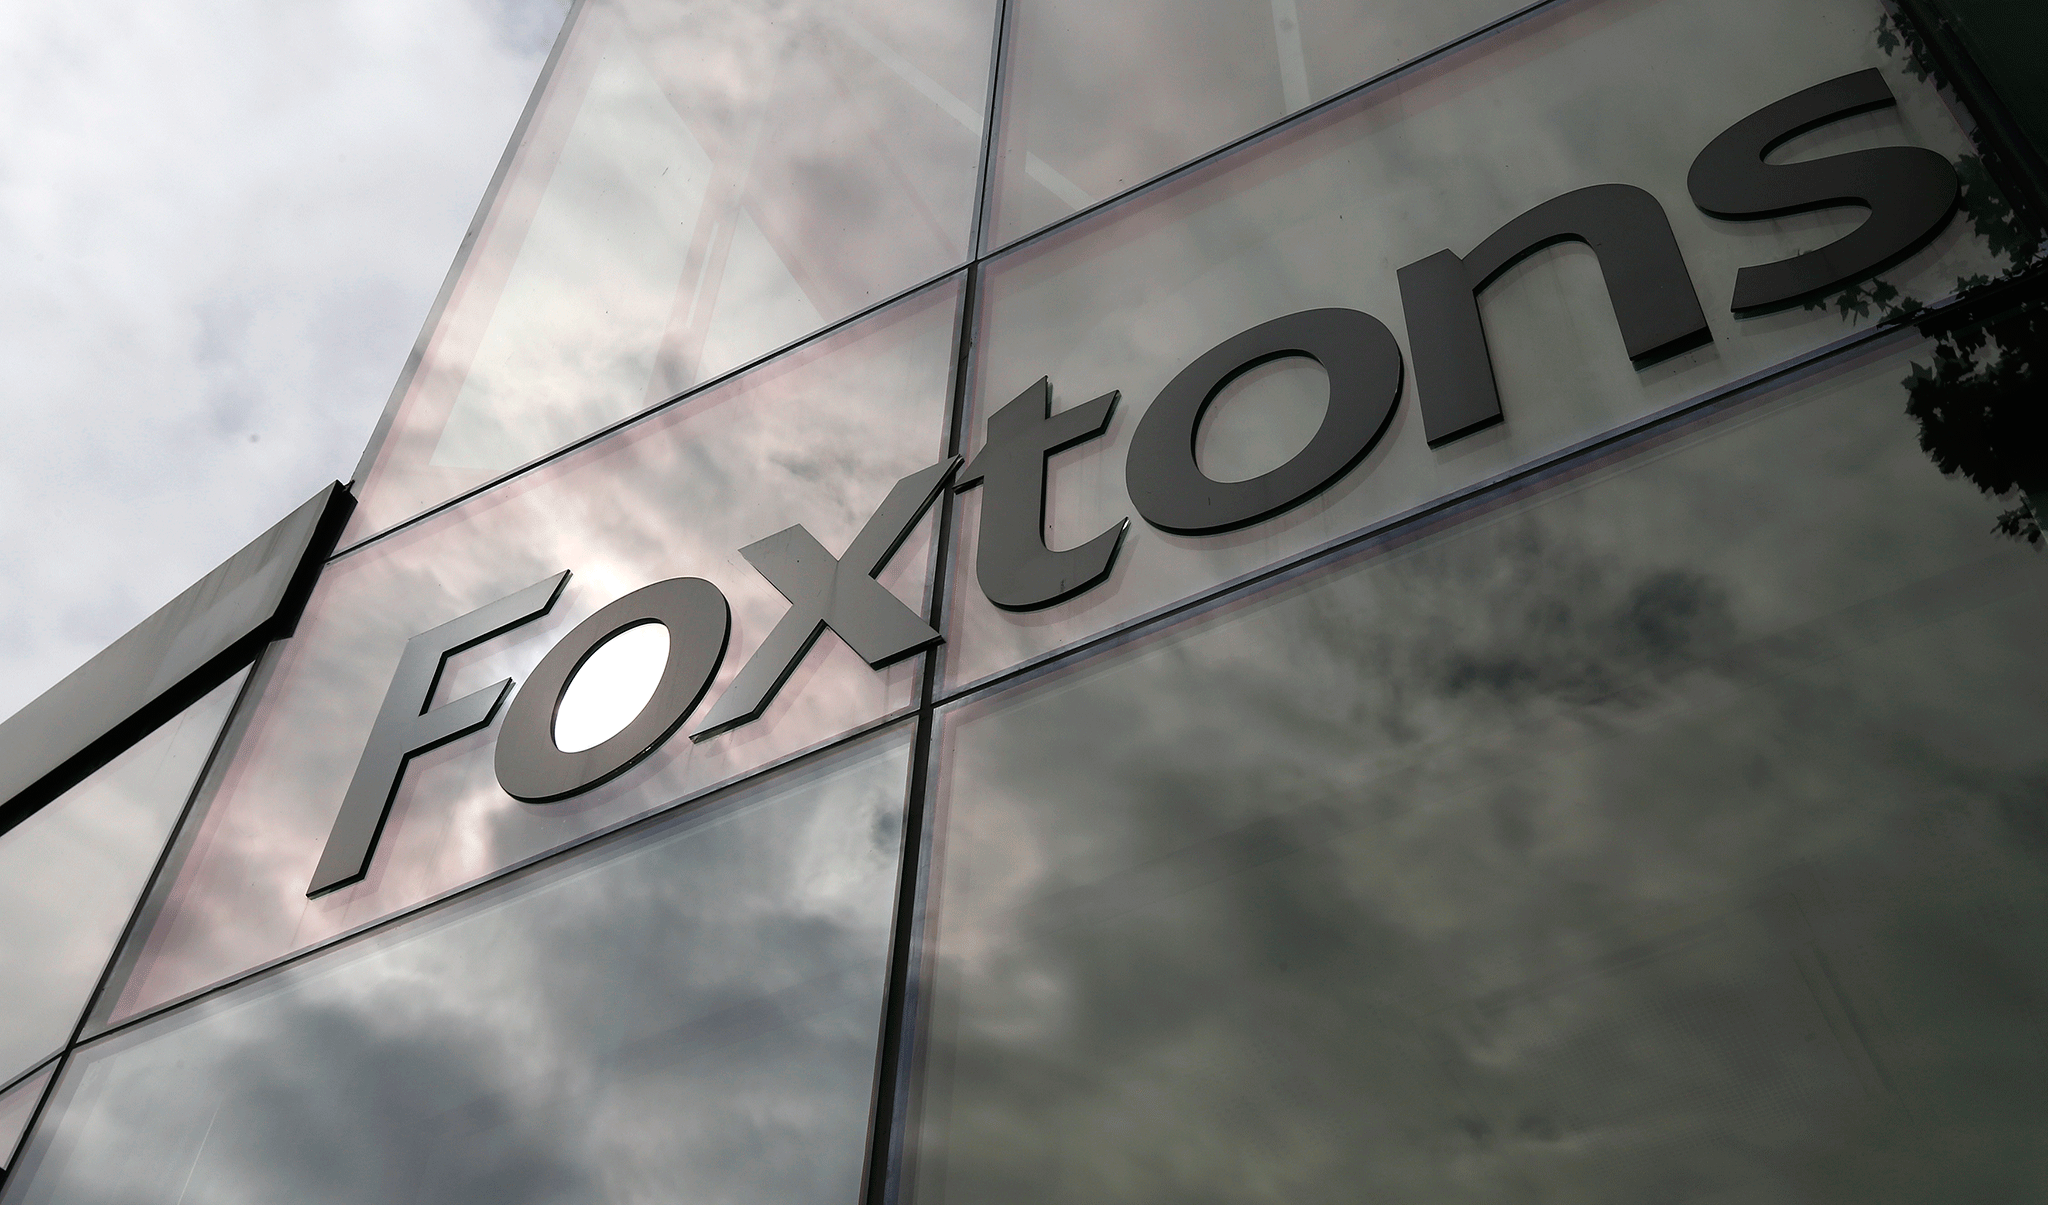 Foxtons has put its expansion plans on hold after a slowdown in London's property market